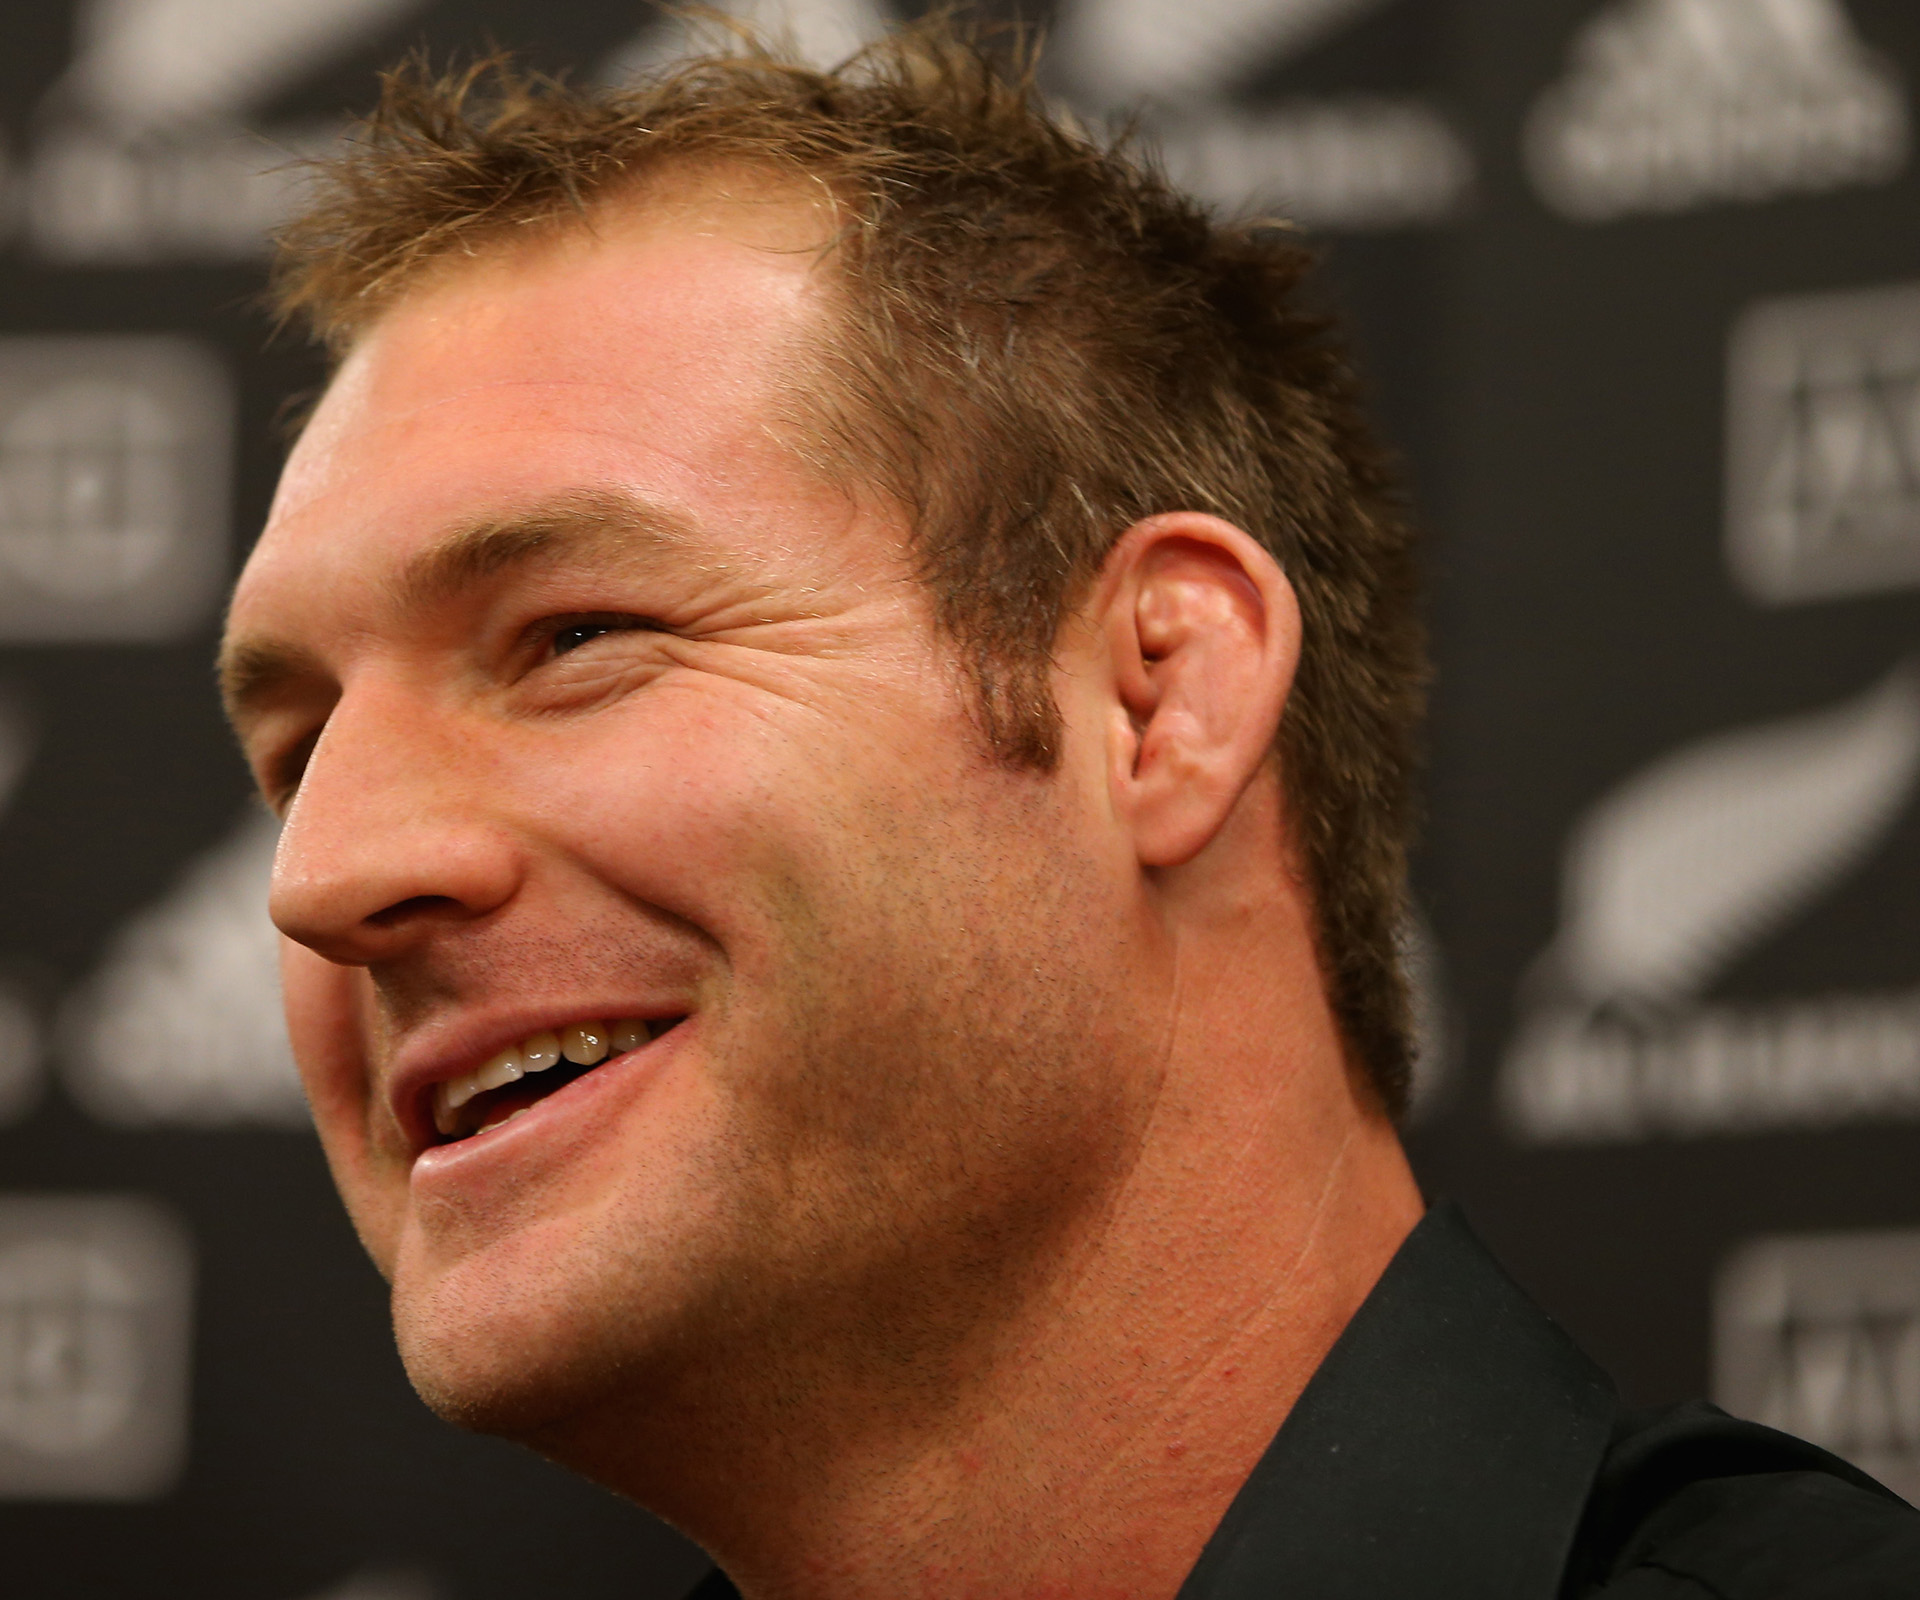 Former All Black Ali Williams celebrates the arrival of new baby